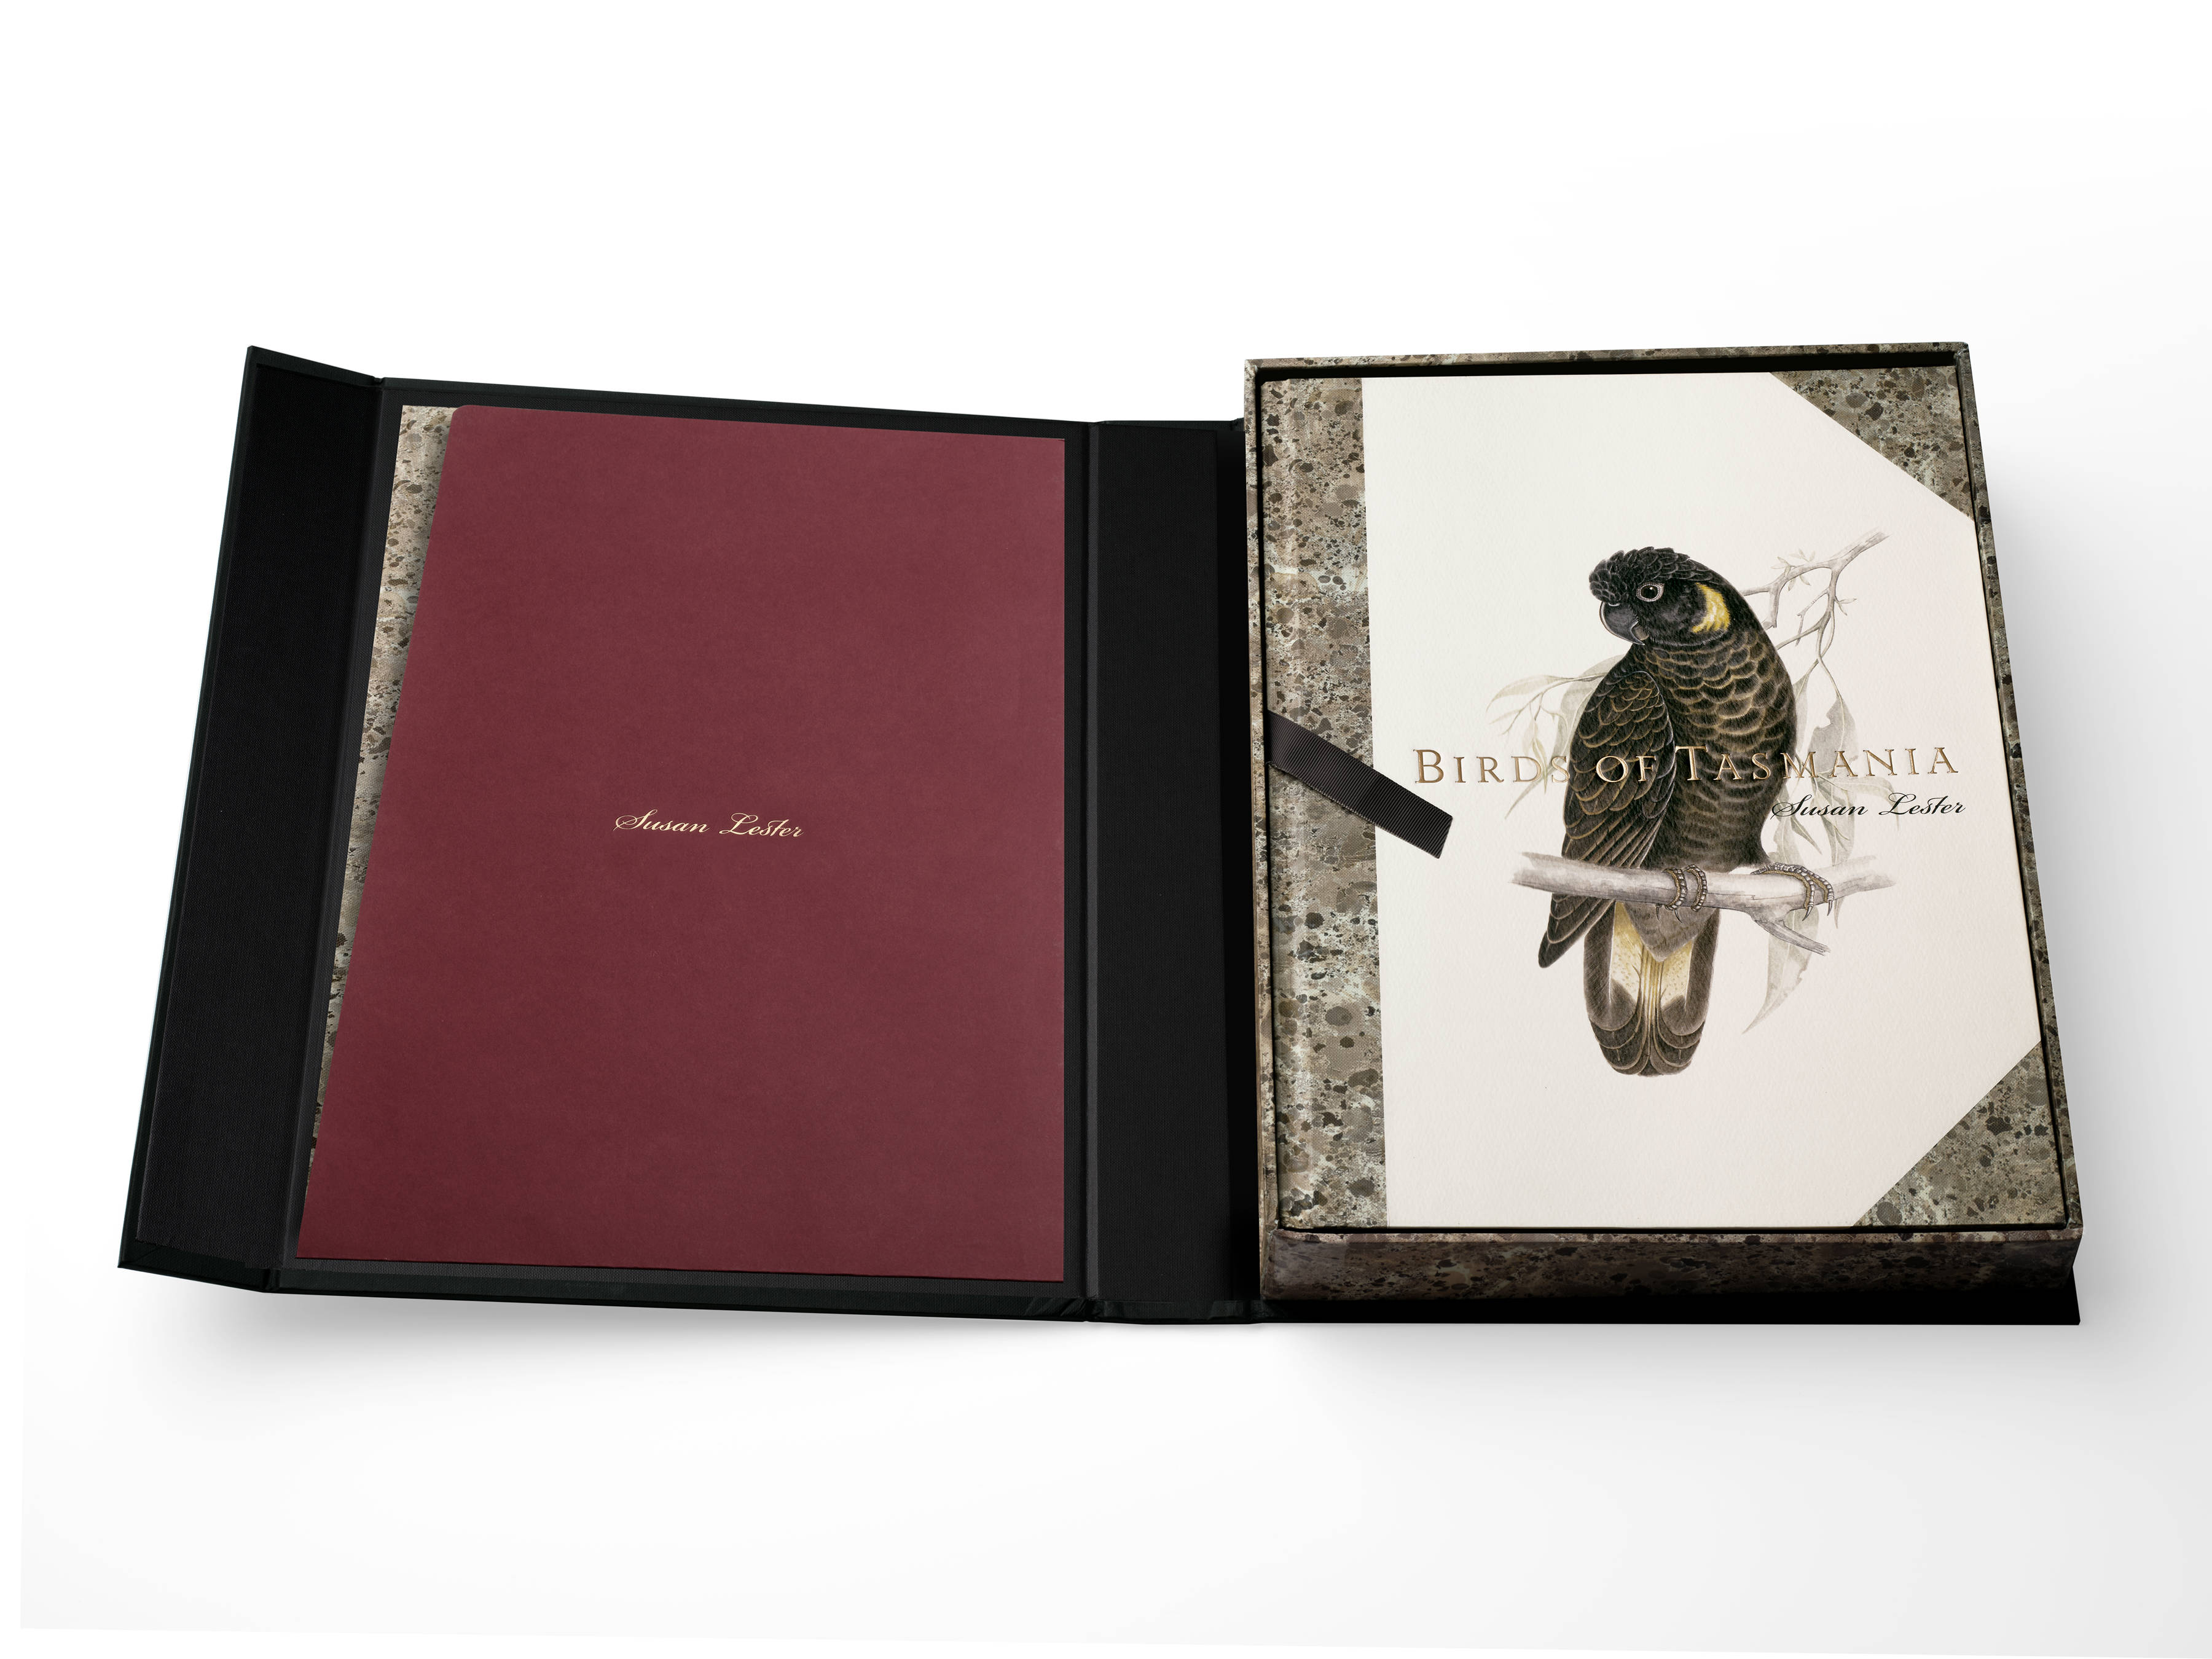 An image of a fully open ‘Birds of Tasmania’ by Susan Lester clamshell presentation box, the book, with a Yellow-tailed Cockatoo ‘Zanda funerea’ and gold and black foil titling is held in the tray on the right. On the left is a claret-red folder with gold foil titling of Susan Lester’s name. This is the folder that holds the archival print of the bird of your choice.